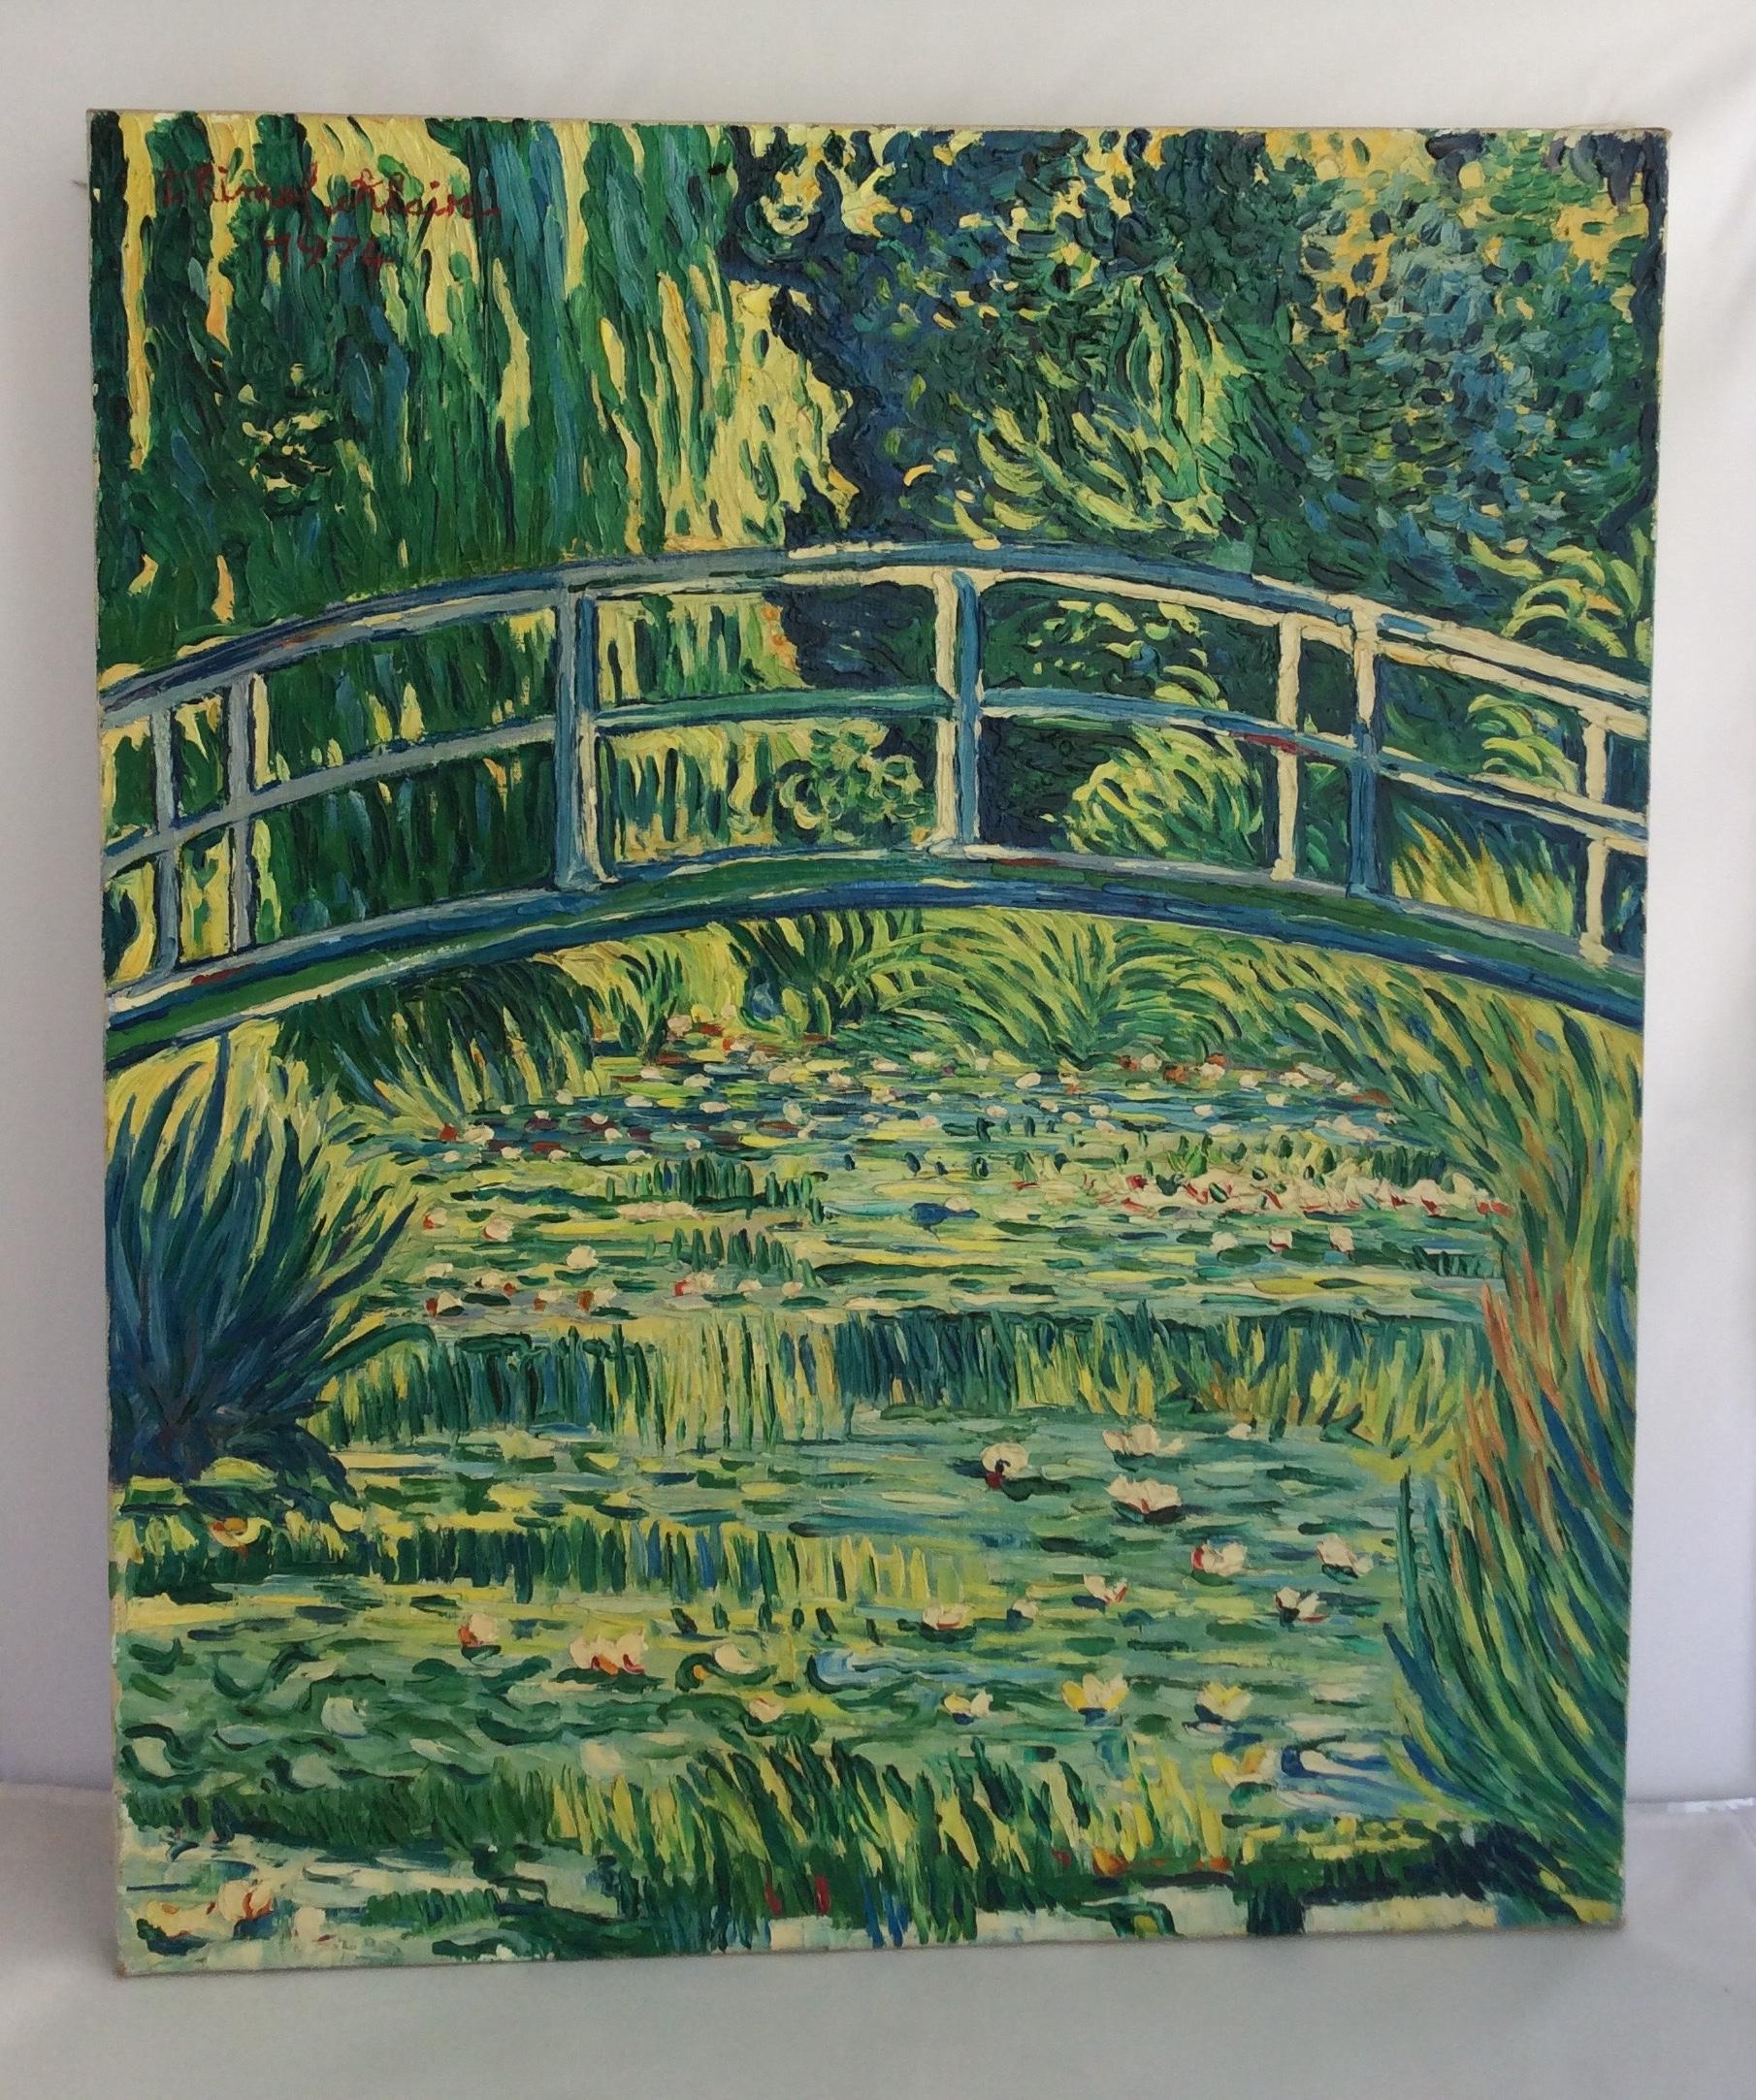 20th Century French Post Impressionist Painting After Monet Water Lillies by Alain Thimel For Sale